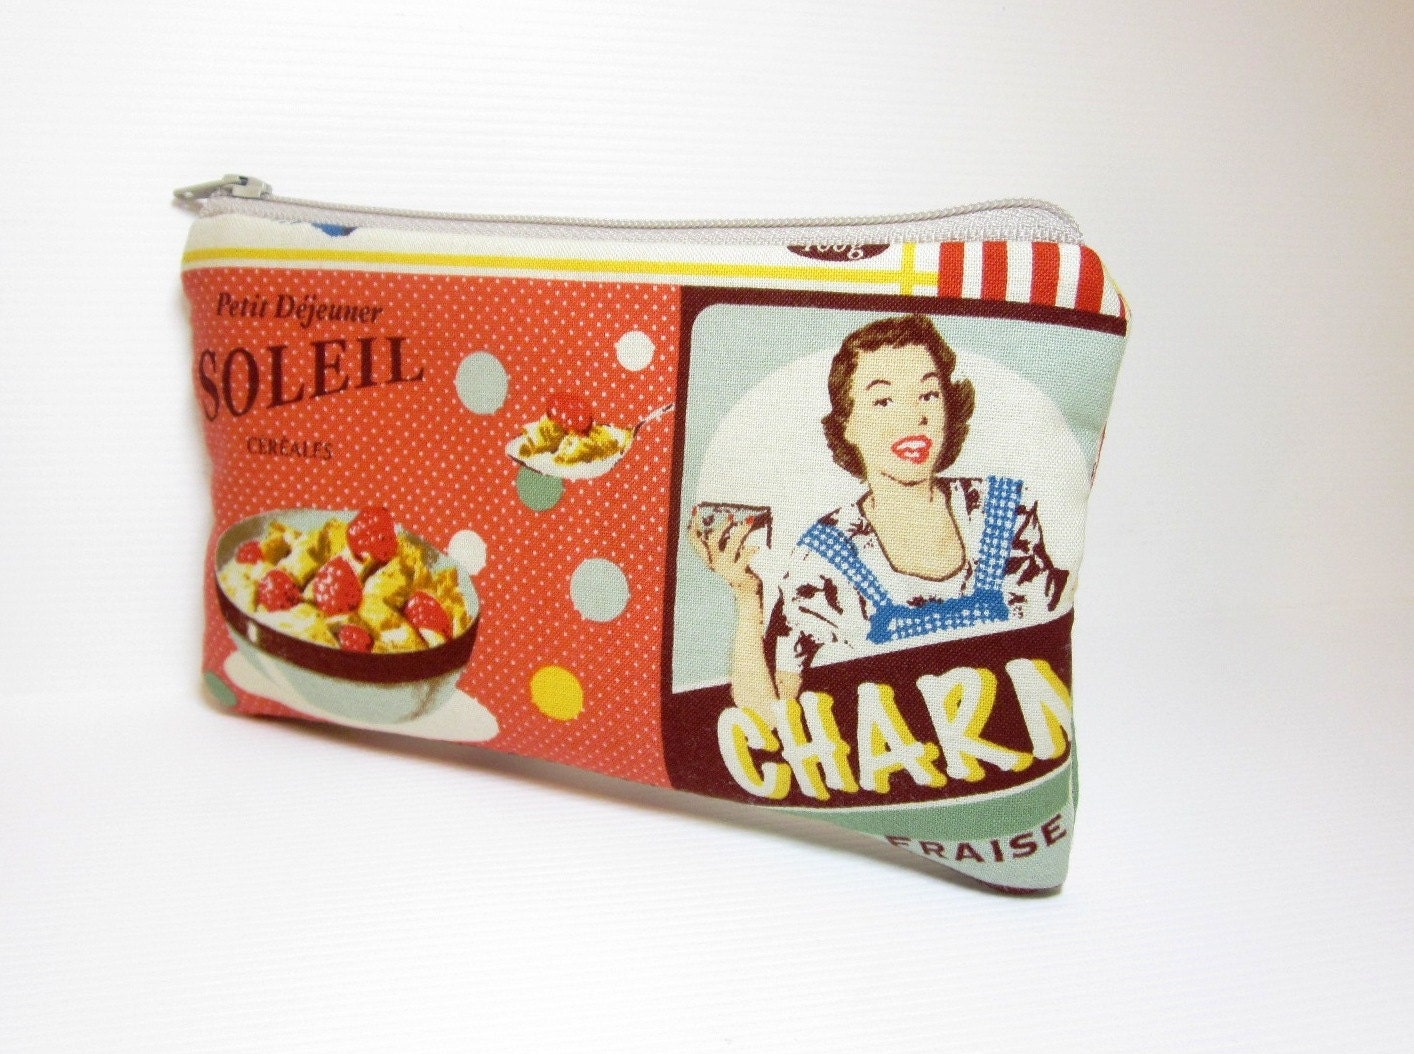 Small Zipper Pouch Small Wallet Small Cosmetic Pouch Retro Vintage Cookies - handjstarcreations